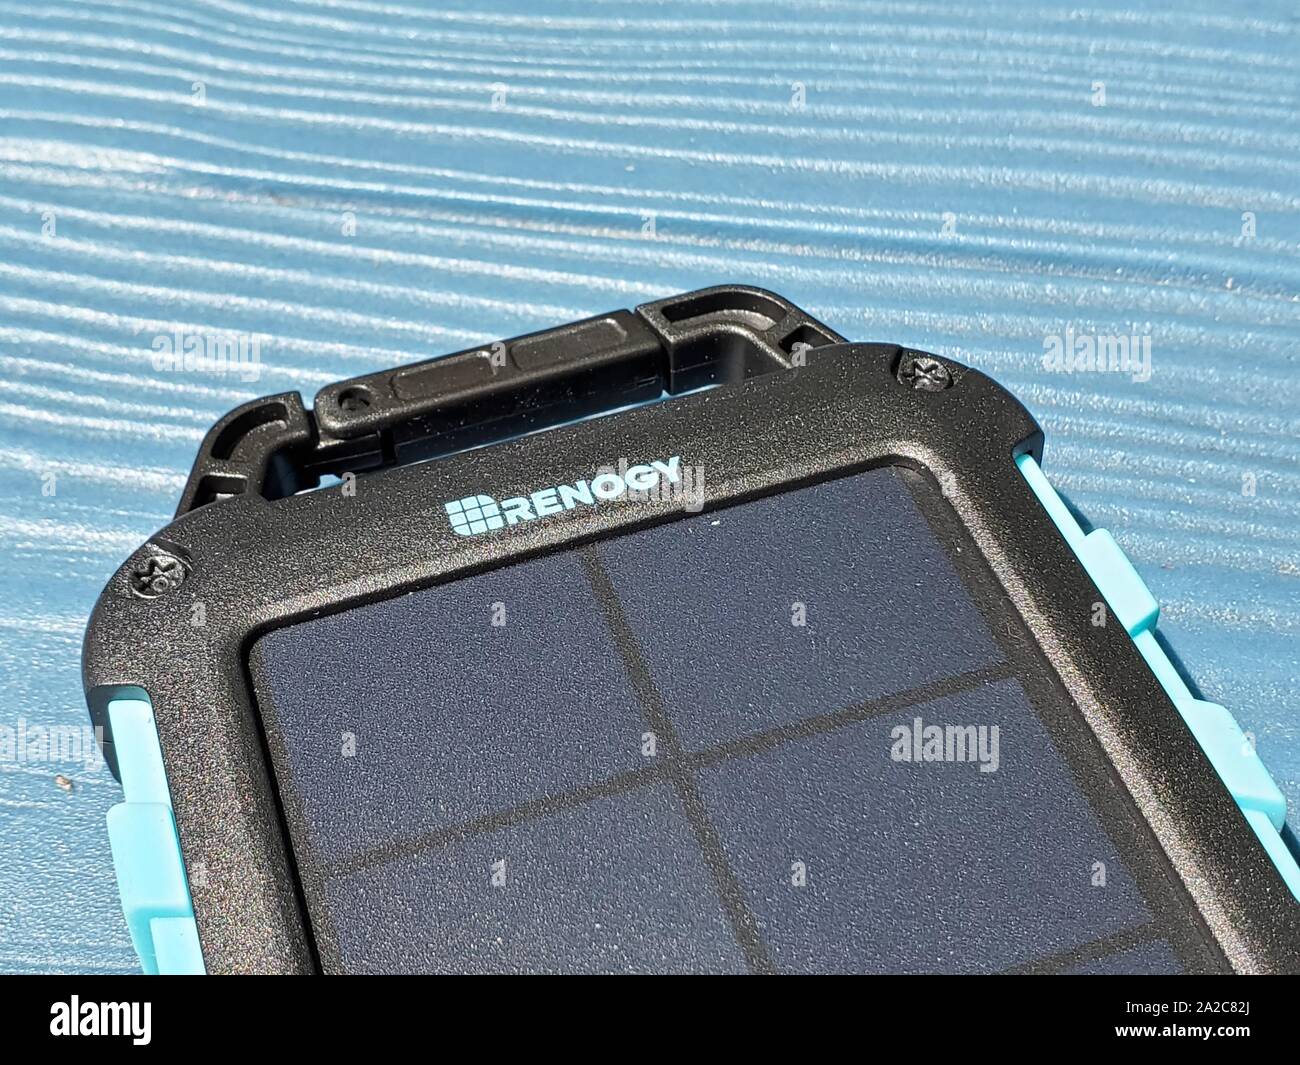 Renogy EPower solar-powered emergency cellular phone charger, designed for use during camping or power outages, charging in sunlight on a blue surface outdoors, San Ramon, California, August 2, 2019. () Stock Photo